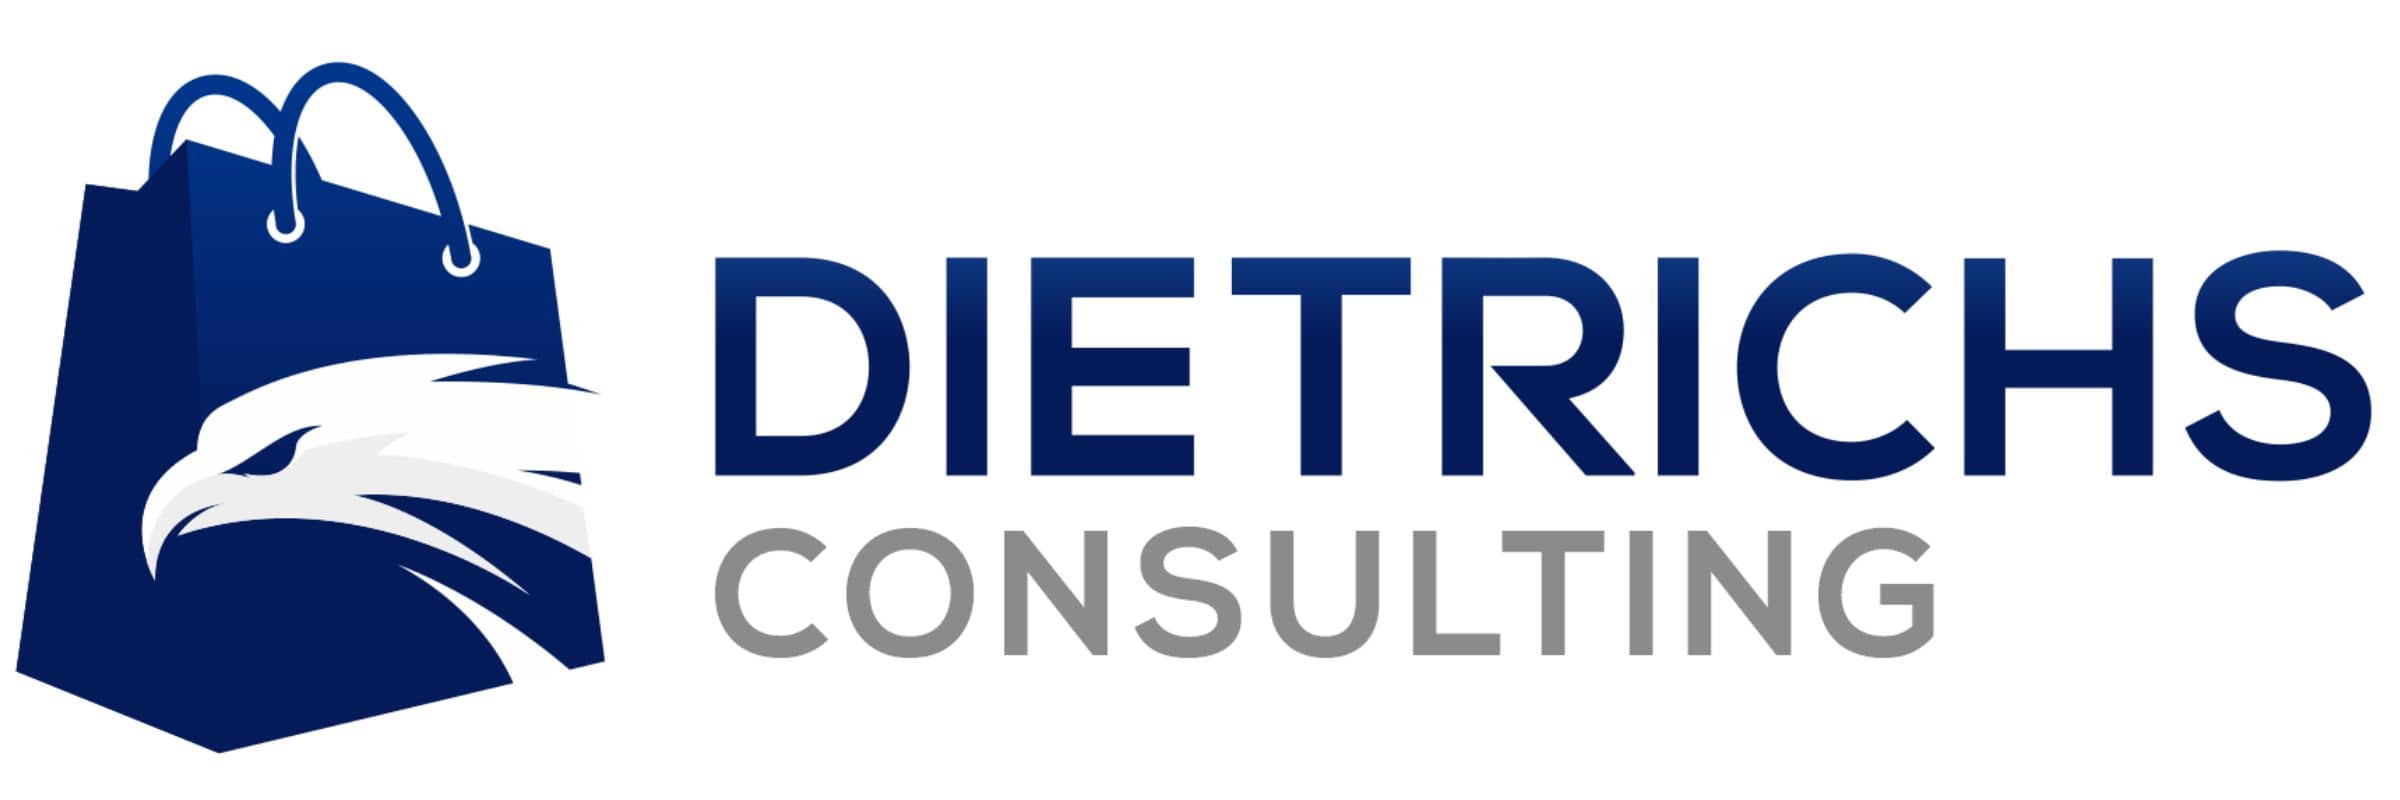 Dietrichs Consulting GmbH